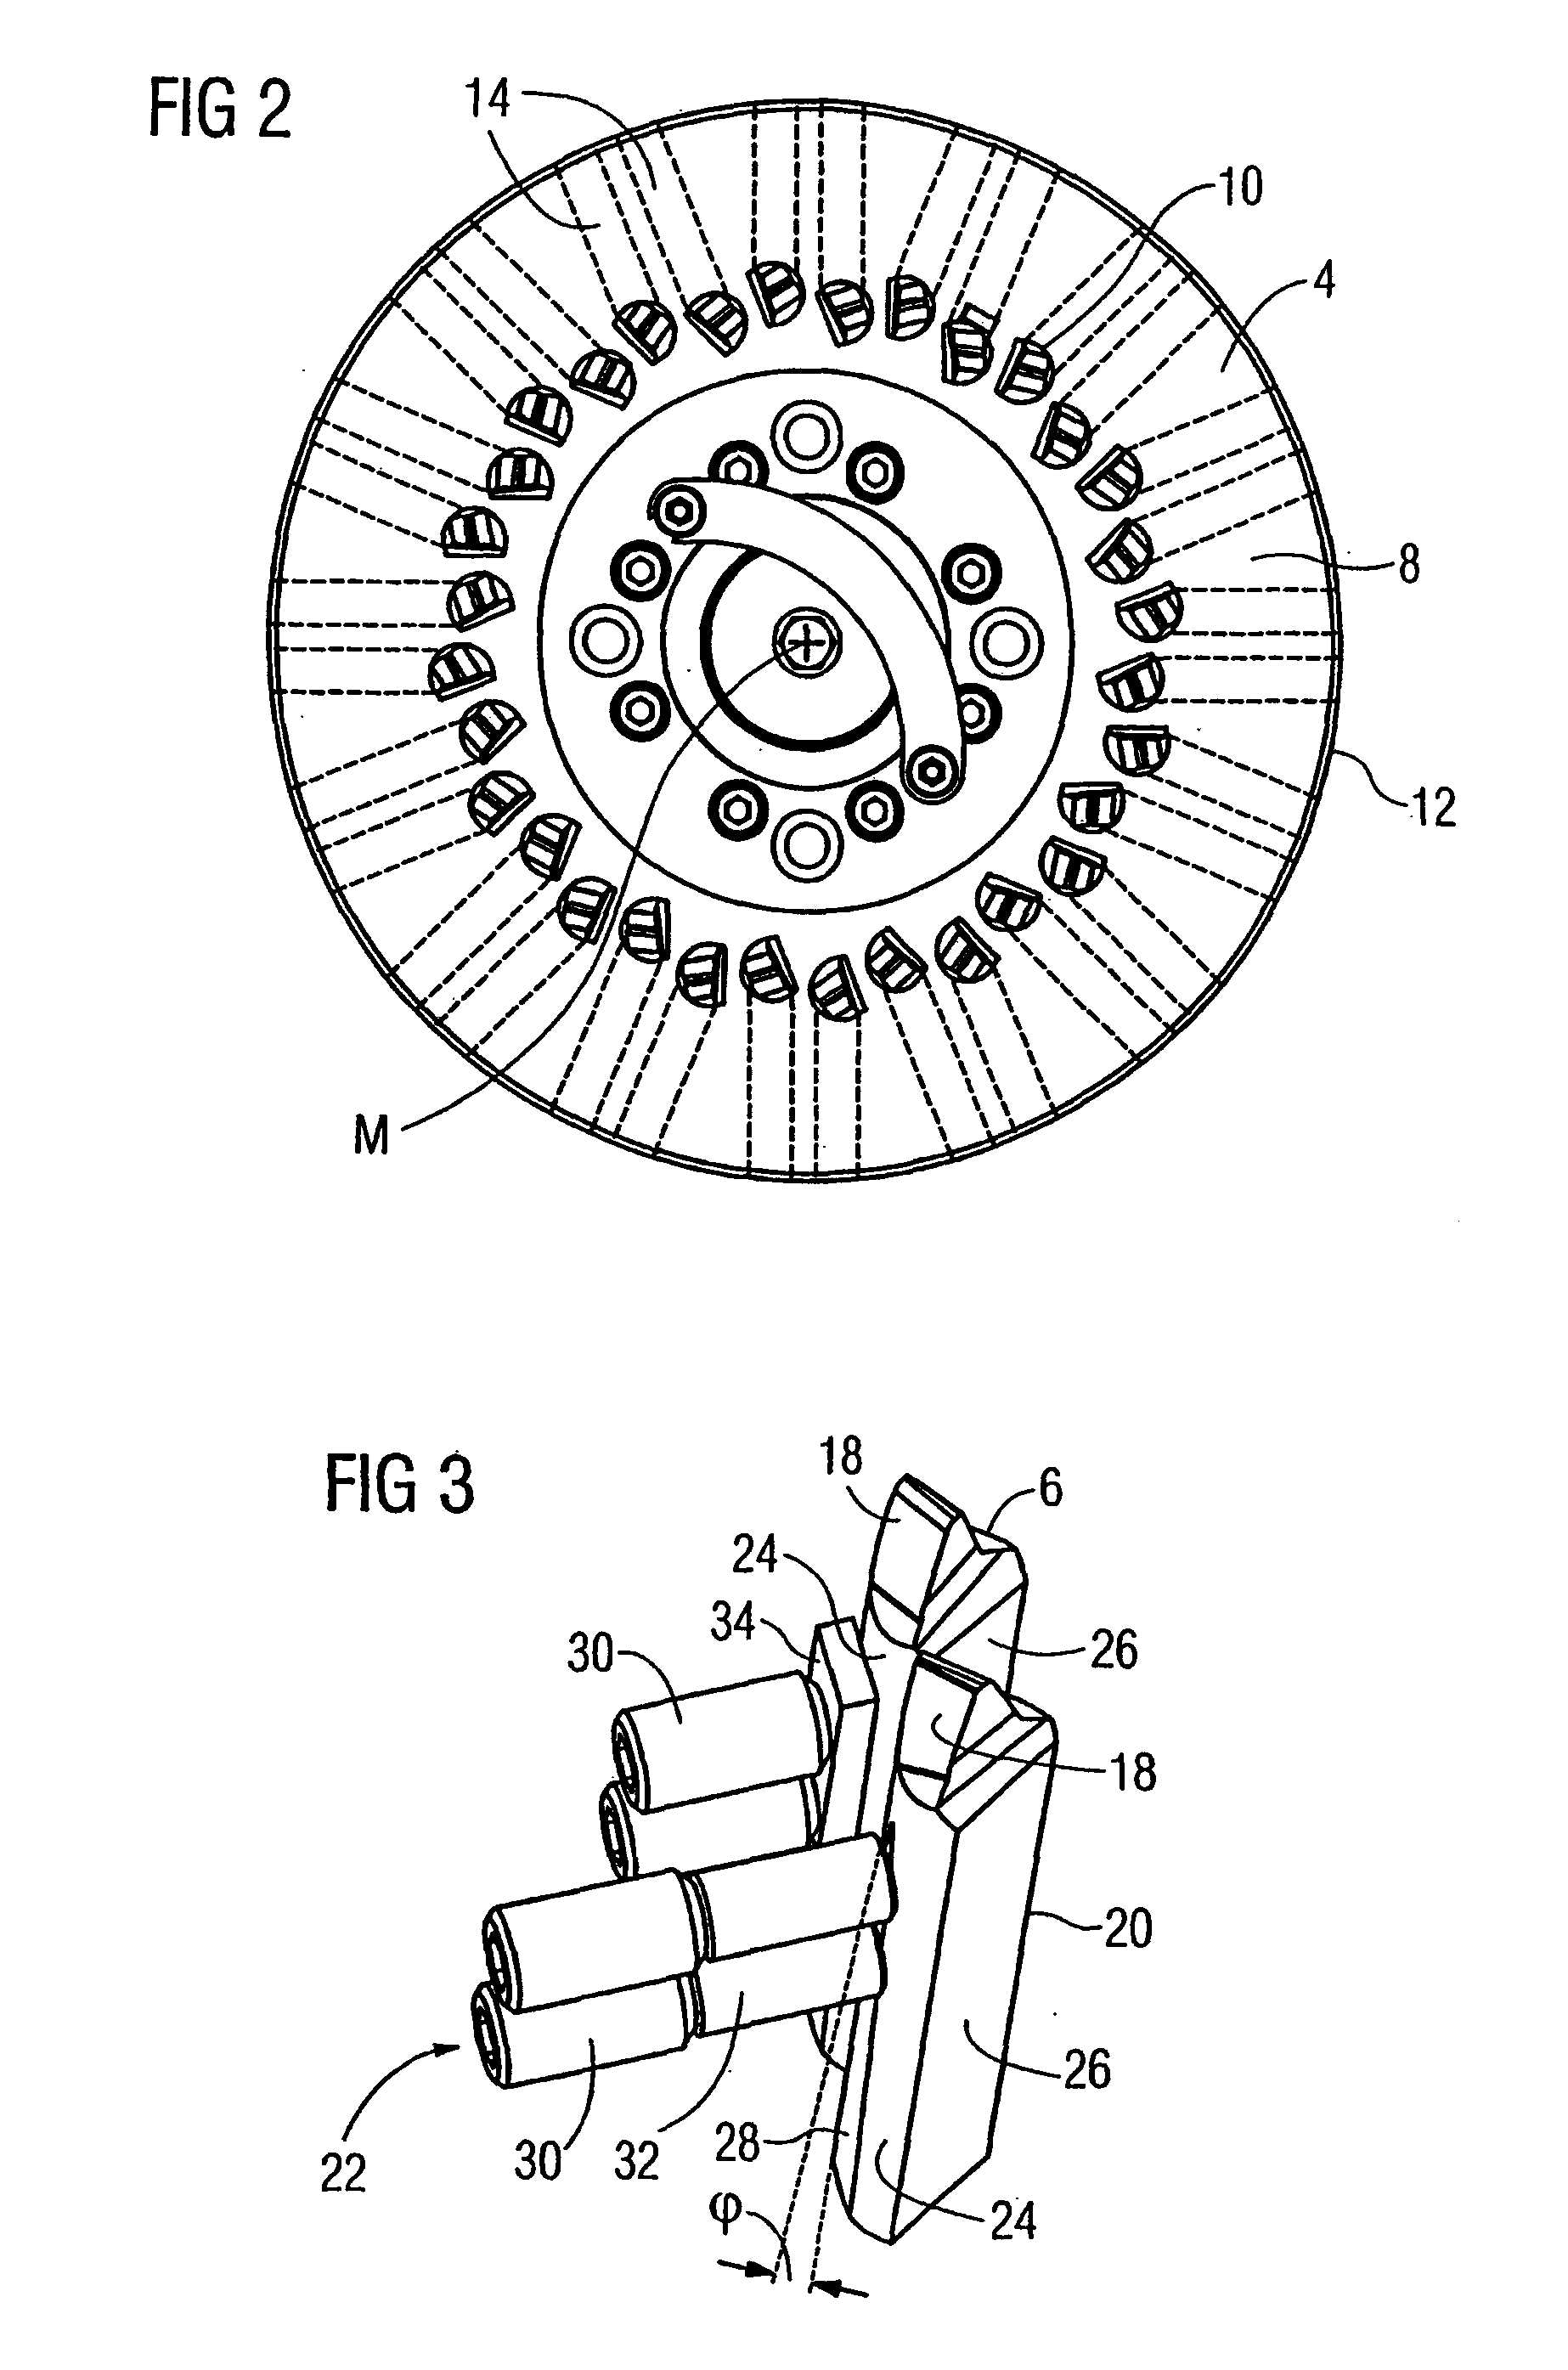 Face hobbing or gear cutting head for cutting gears, such as spiral, bevel, spiral-bevel, and hypoid gears